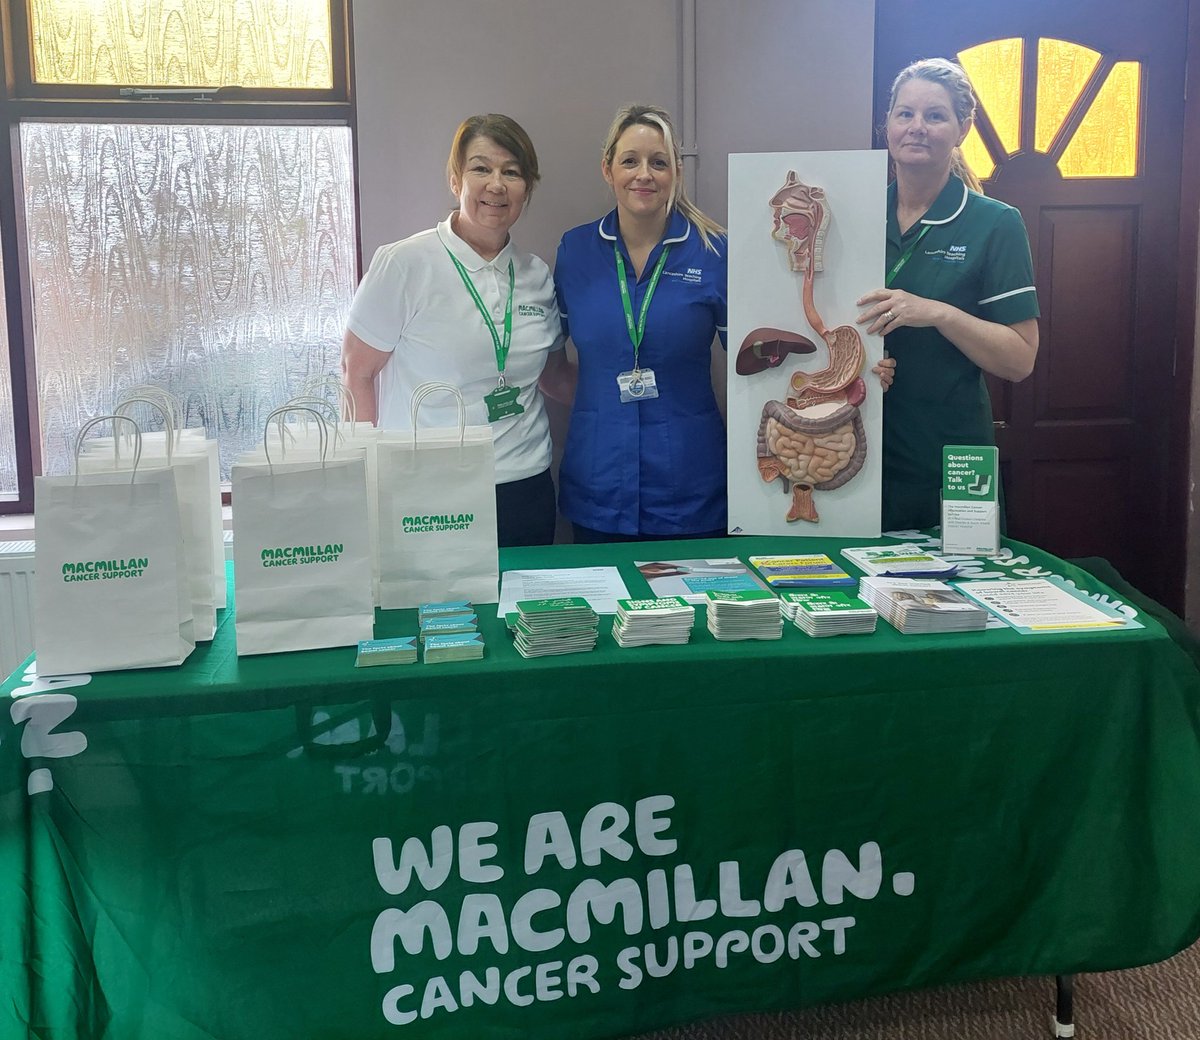 Thank you to the ladies at the Madina Mosque. It was a lovely opportunity for the Colorectal team to share their knowledge on bowel cancer screening, signs, and symptoms with the local community. We are looking forward to joining you again. @LancsHospitals @macmillancancer